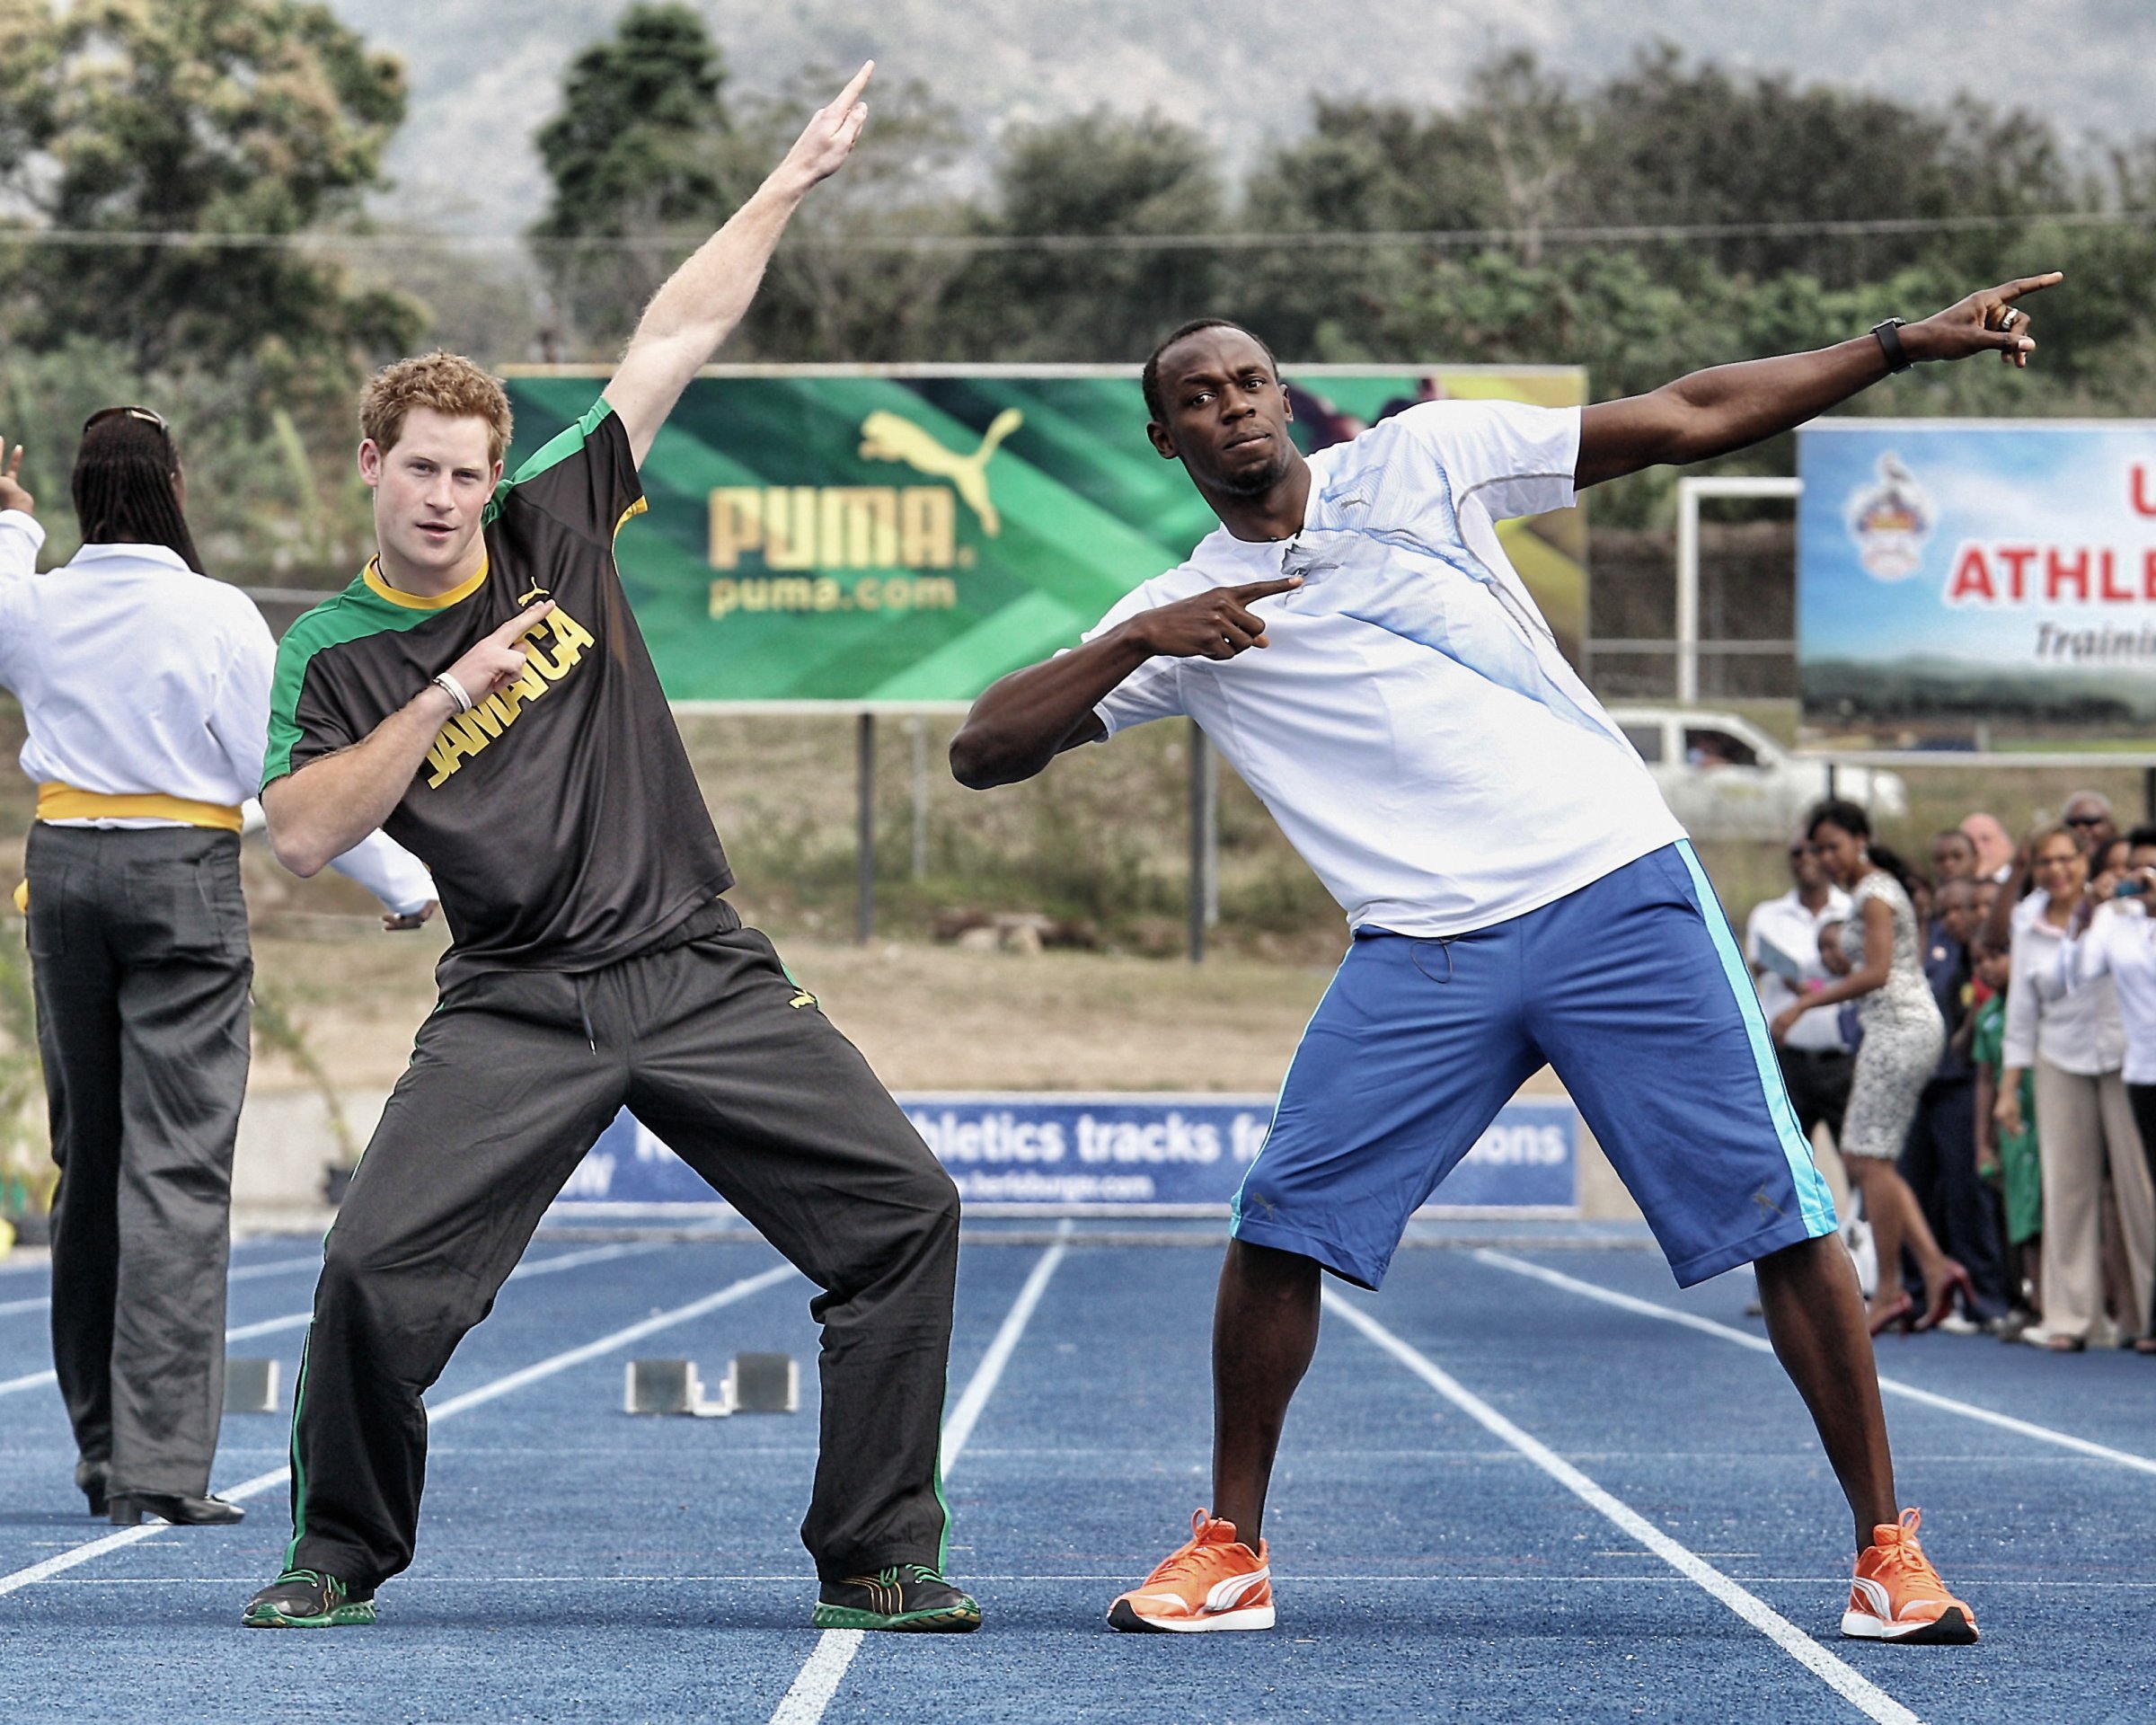 Prince Harry races Usain Bolt at the Usain Bolt Track at the University of the West Indies in Kingston, Jamaica on March 6, 2012.